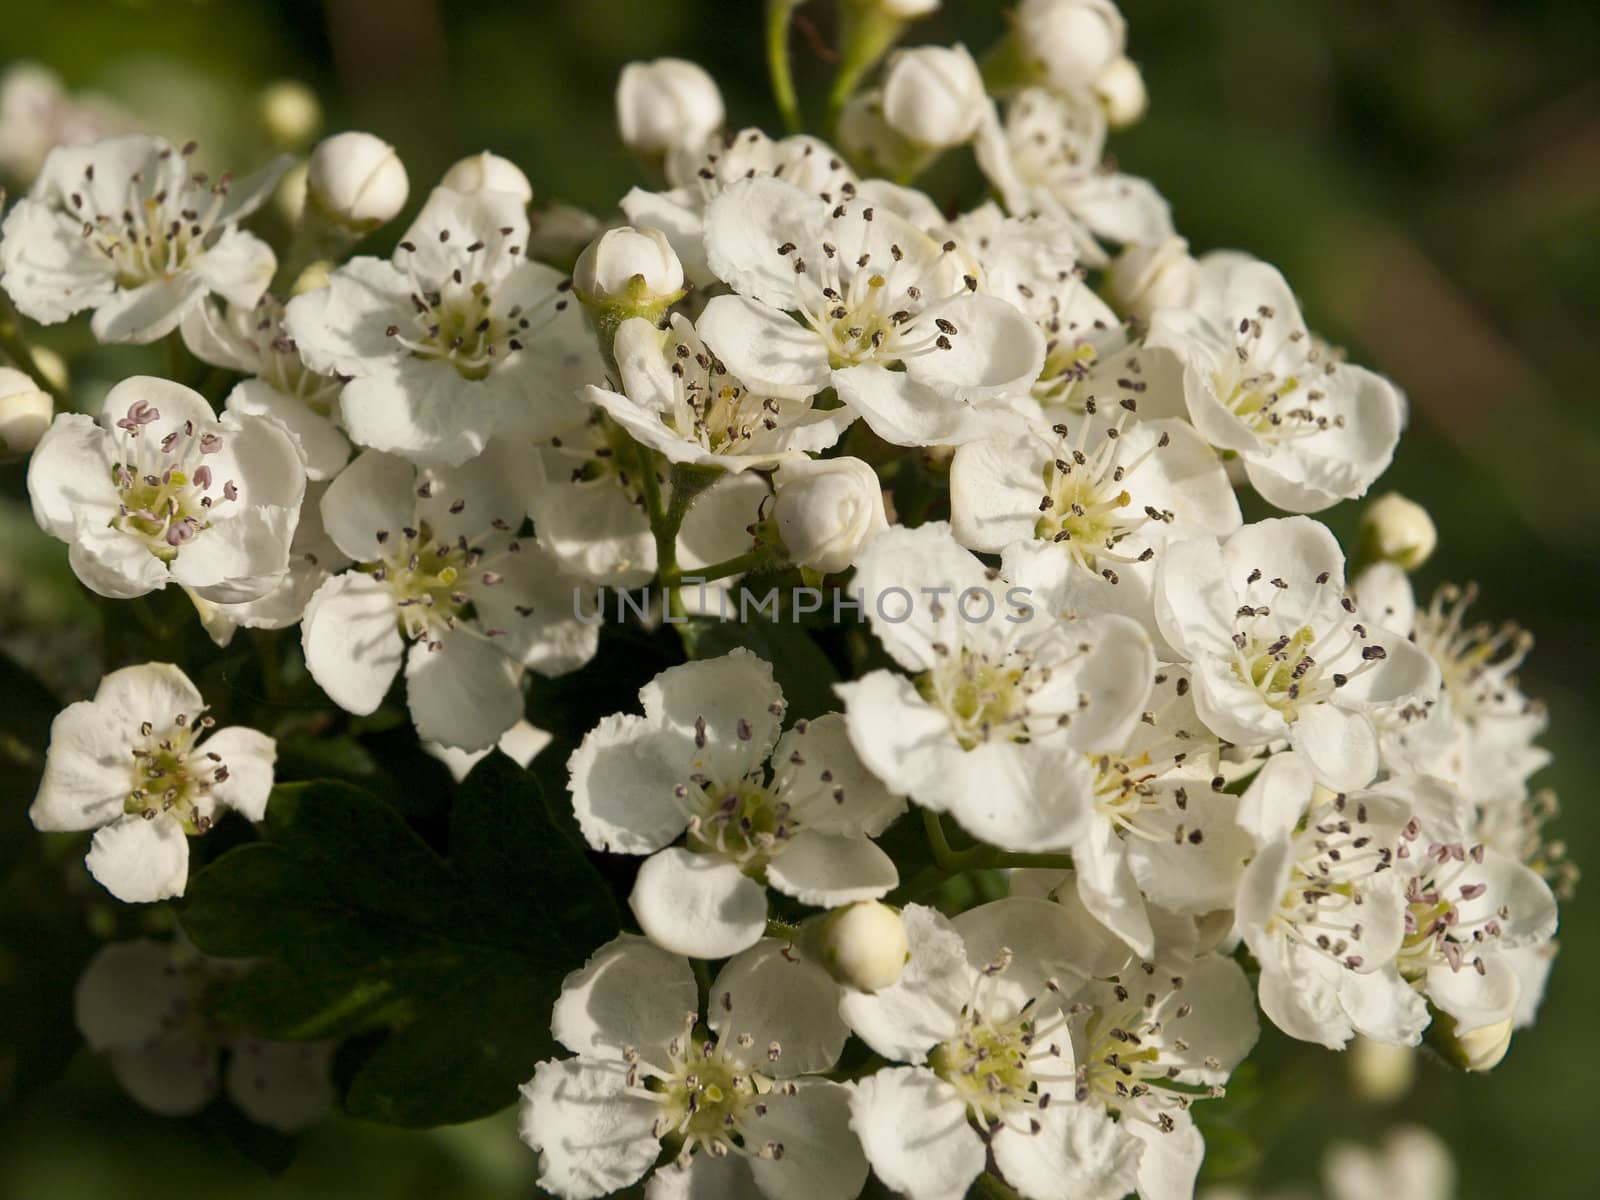 The May blossom in full splendour on a hawthorn tree